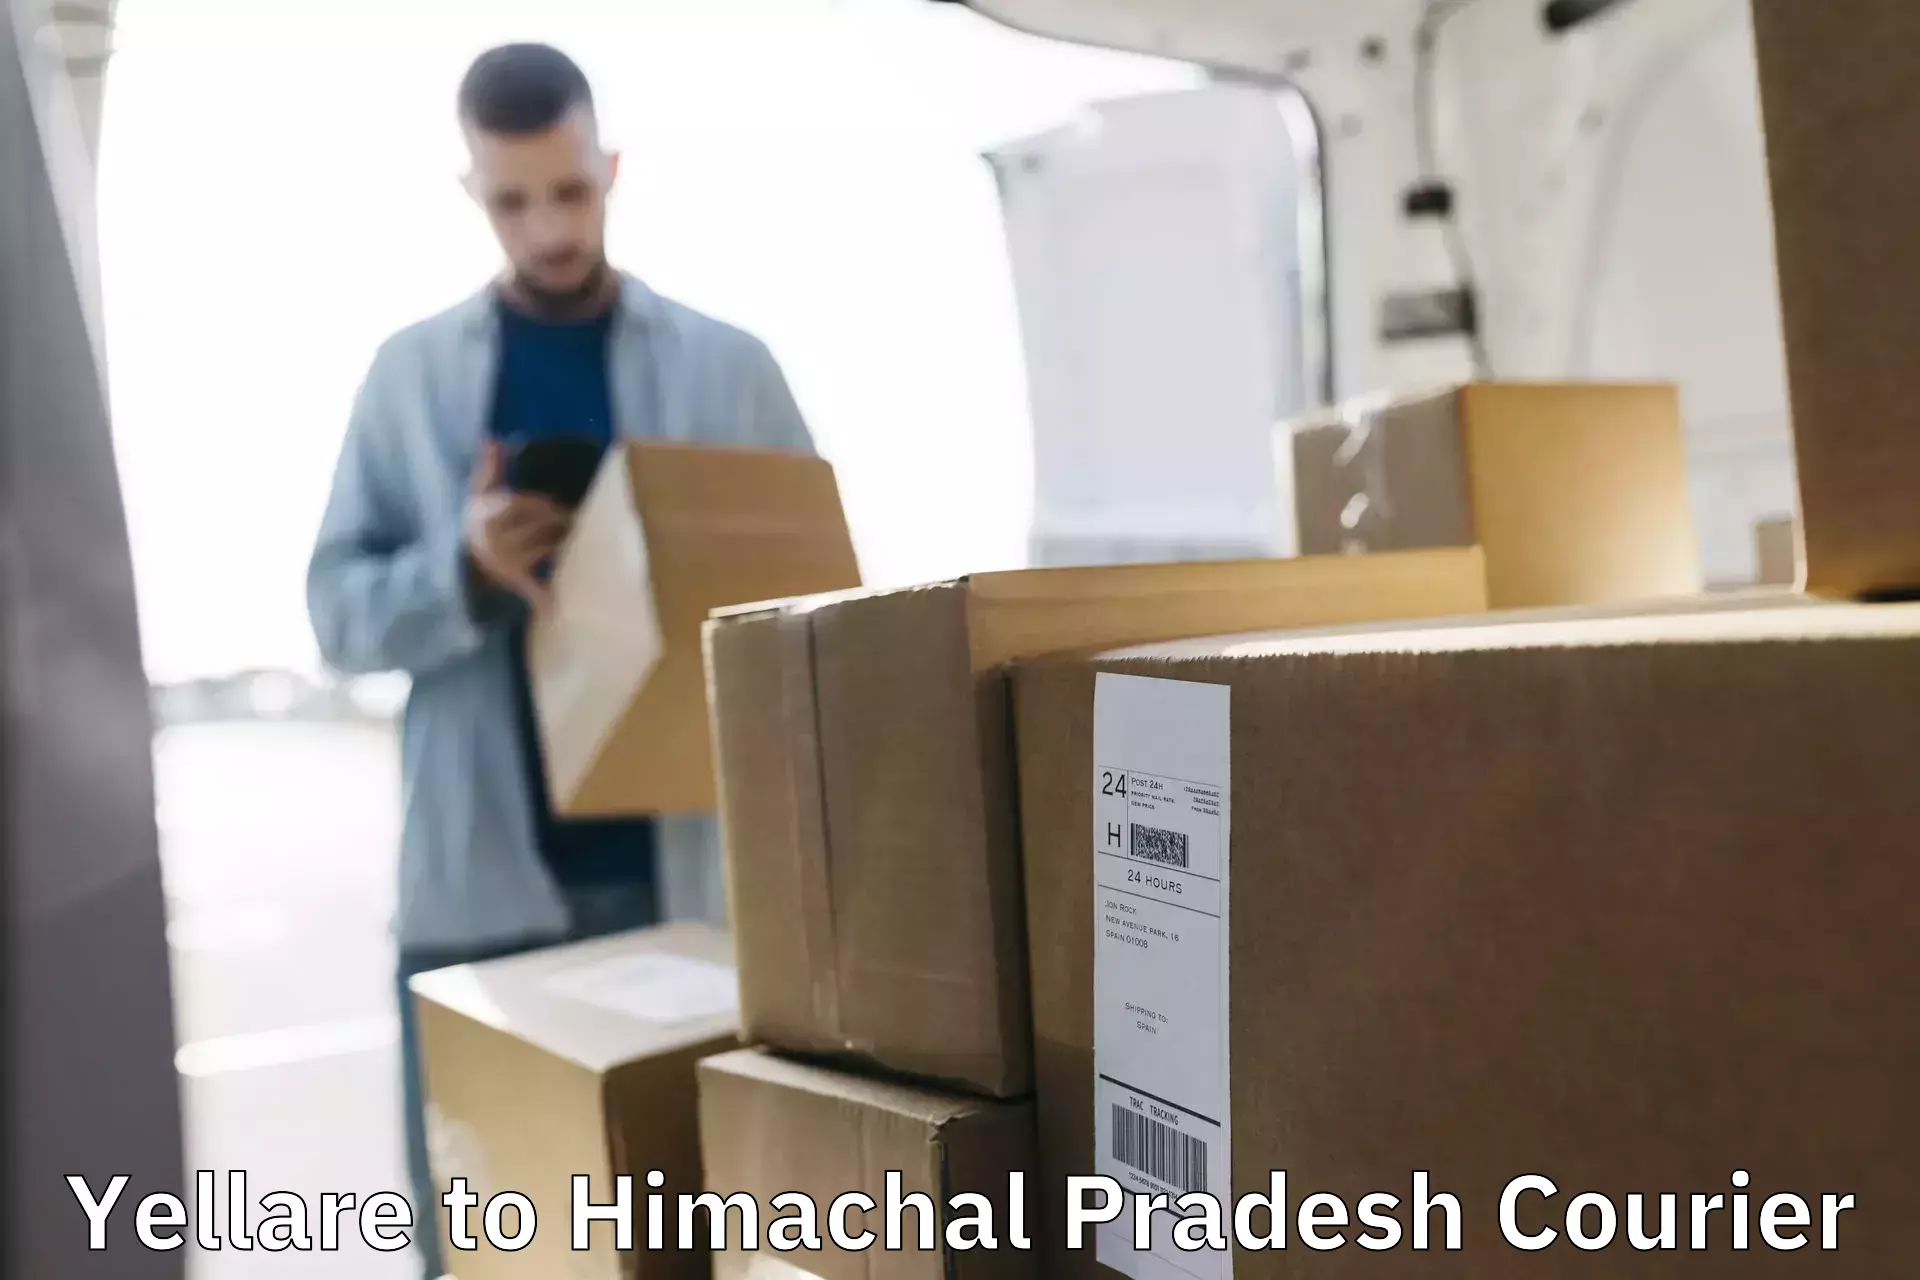 Express delivery network Yellare to Himachal Pradesh